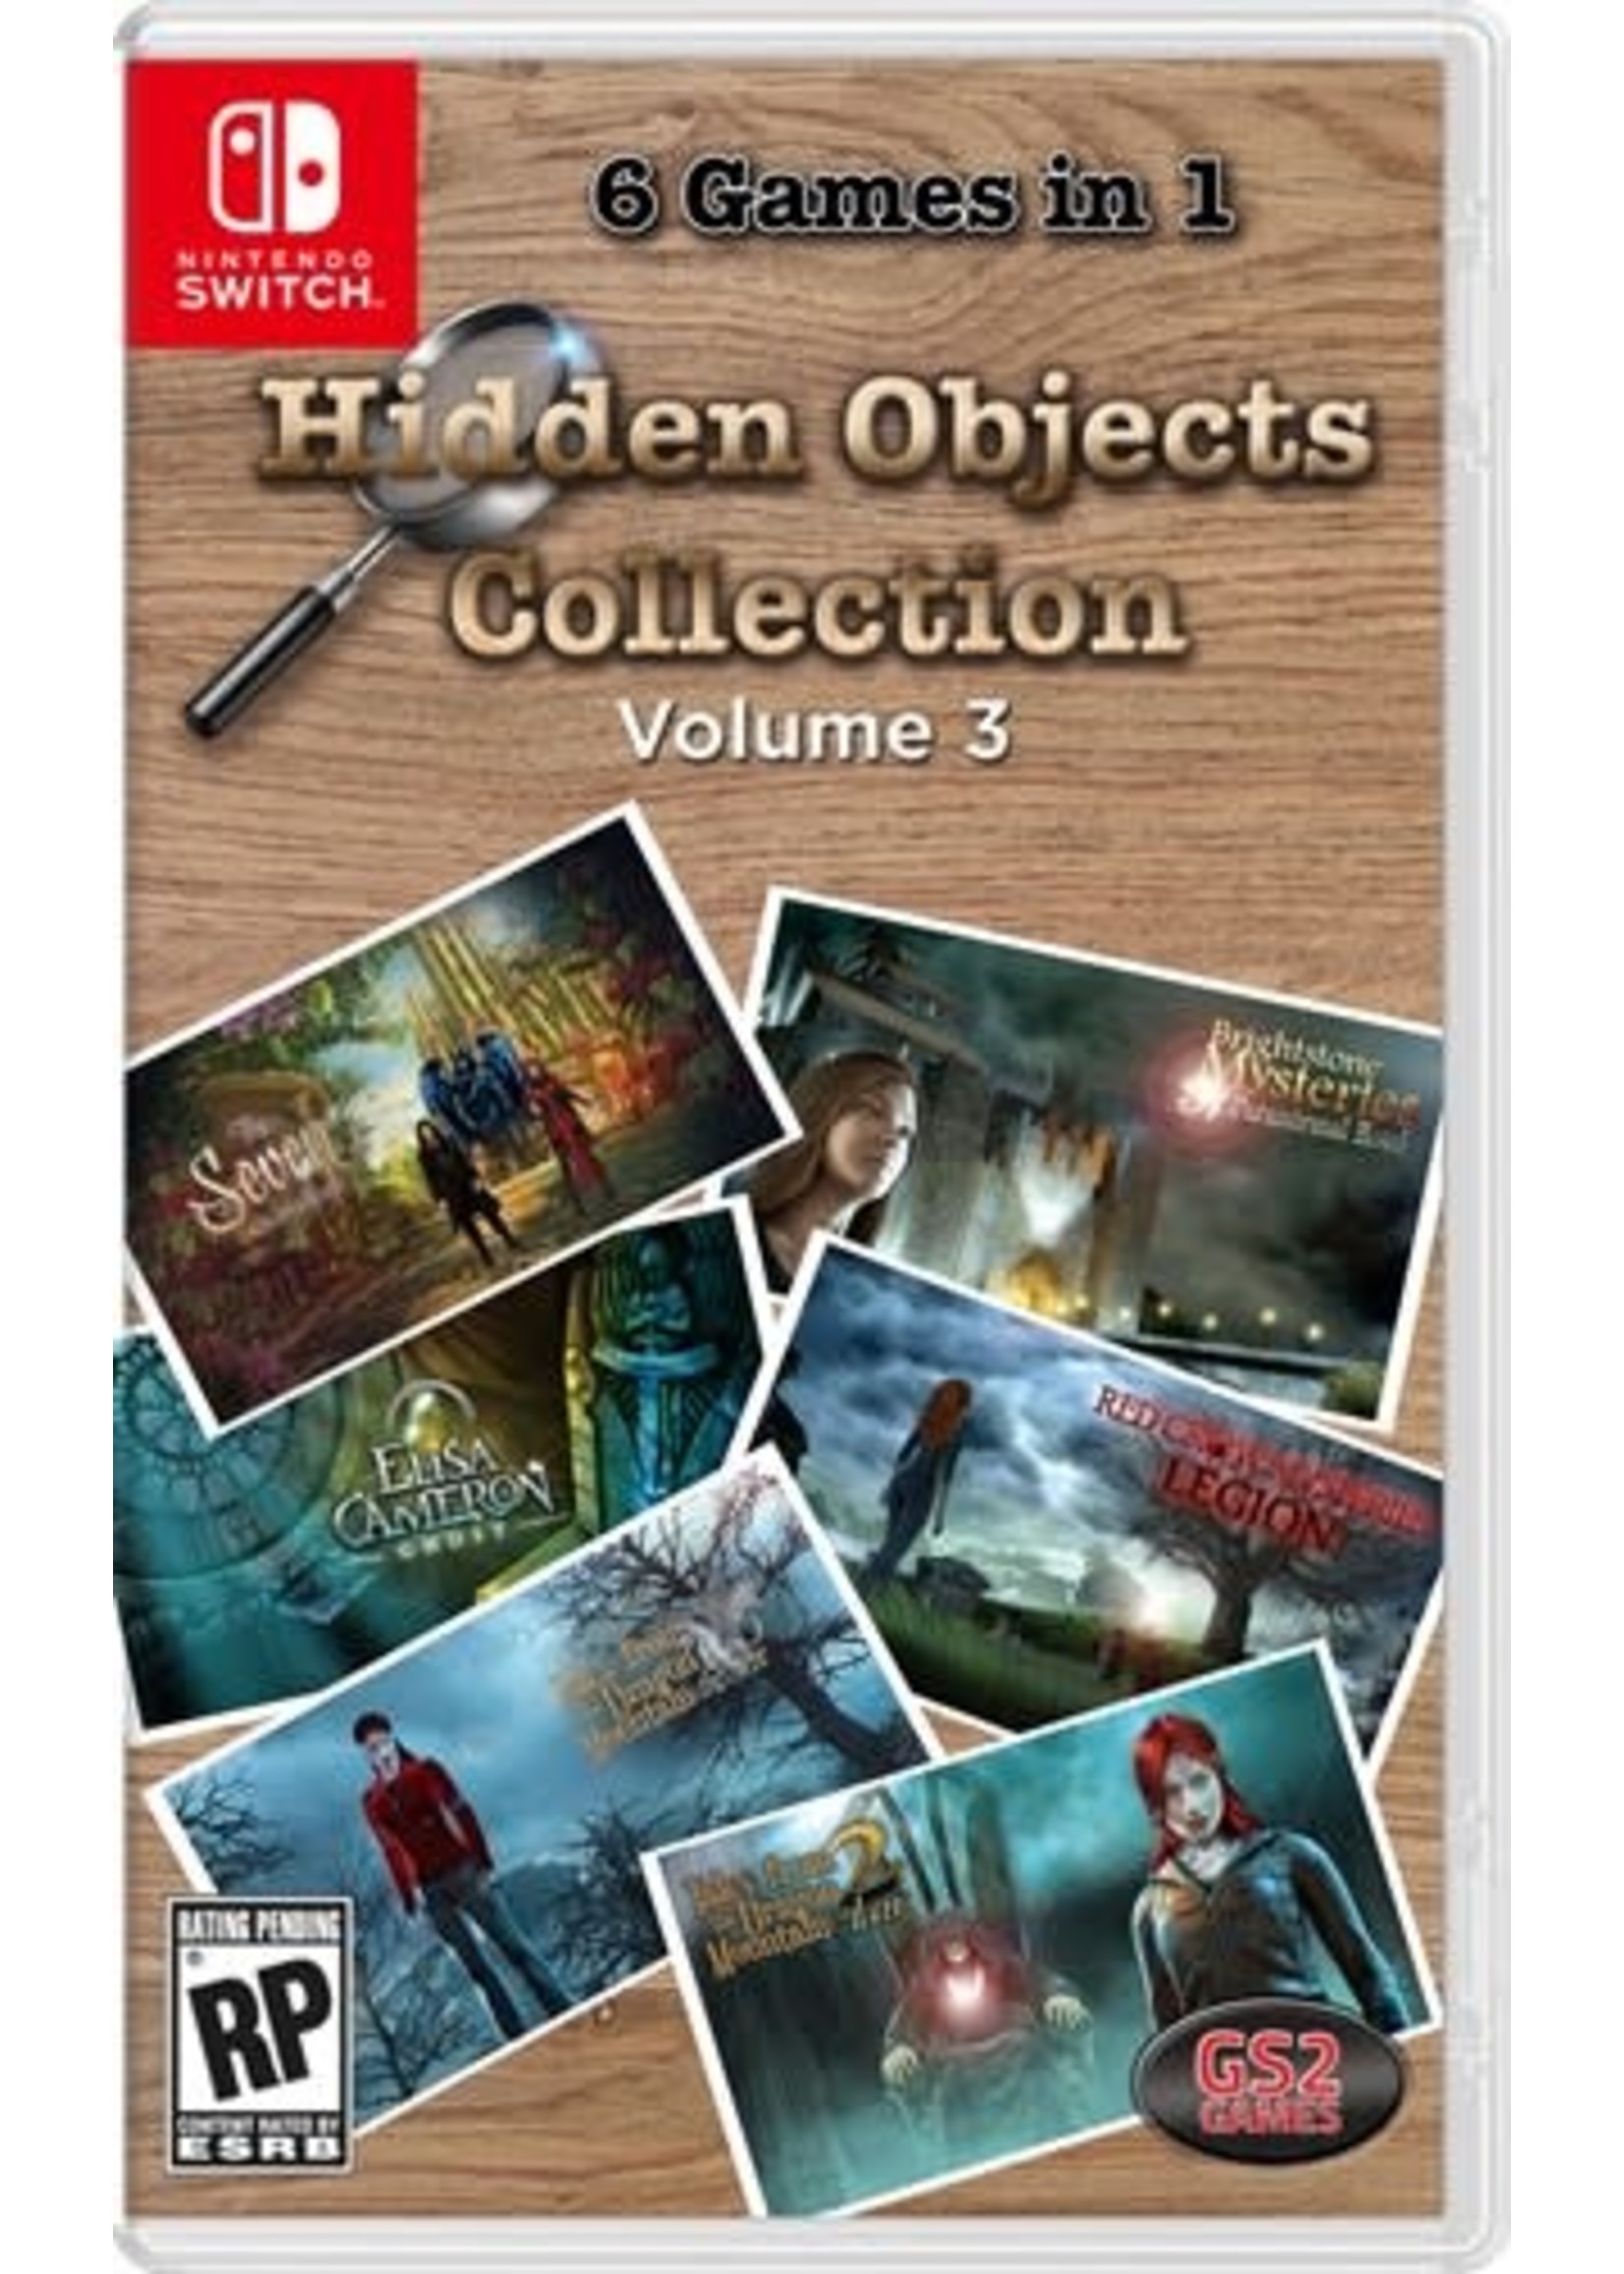 Hidden Objects Collection Volume 3 SWITCH